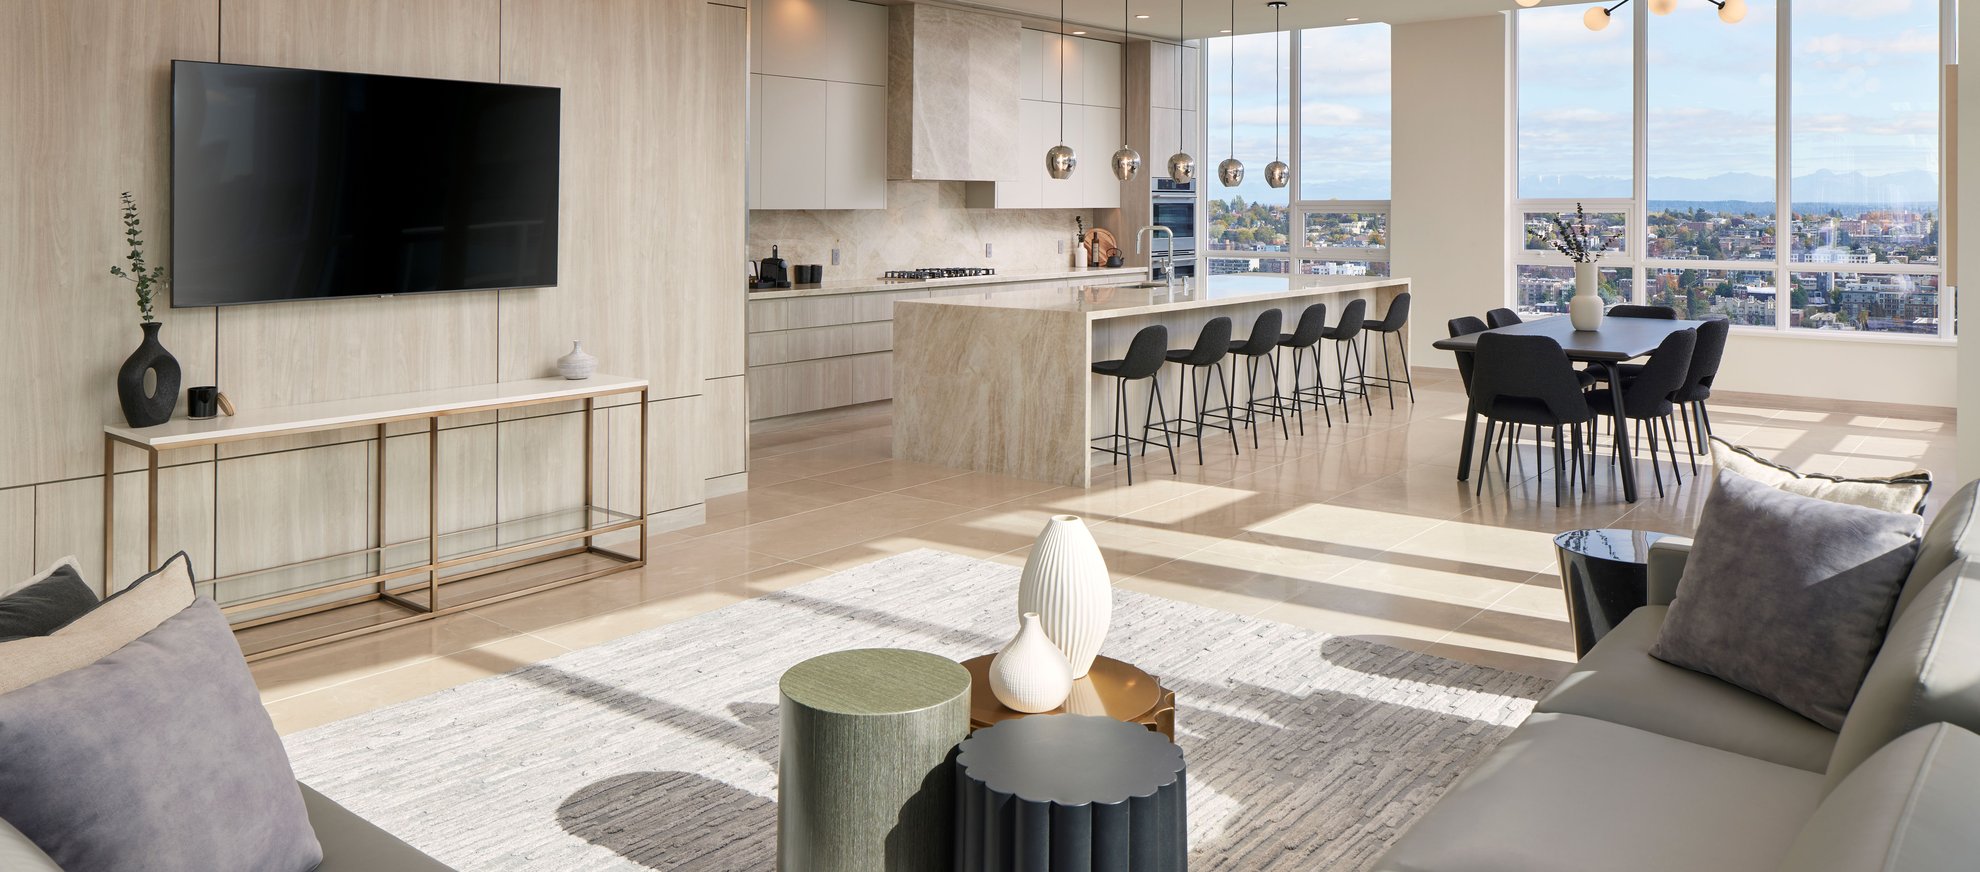 contemporarily designed suite with living, dining, and kitchen areas at the penthouse at level seattle south lake union.jpg